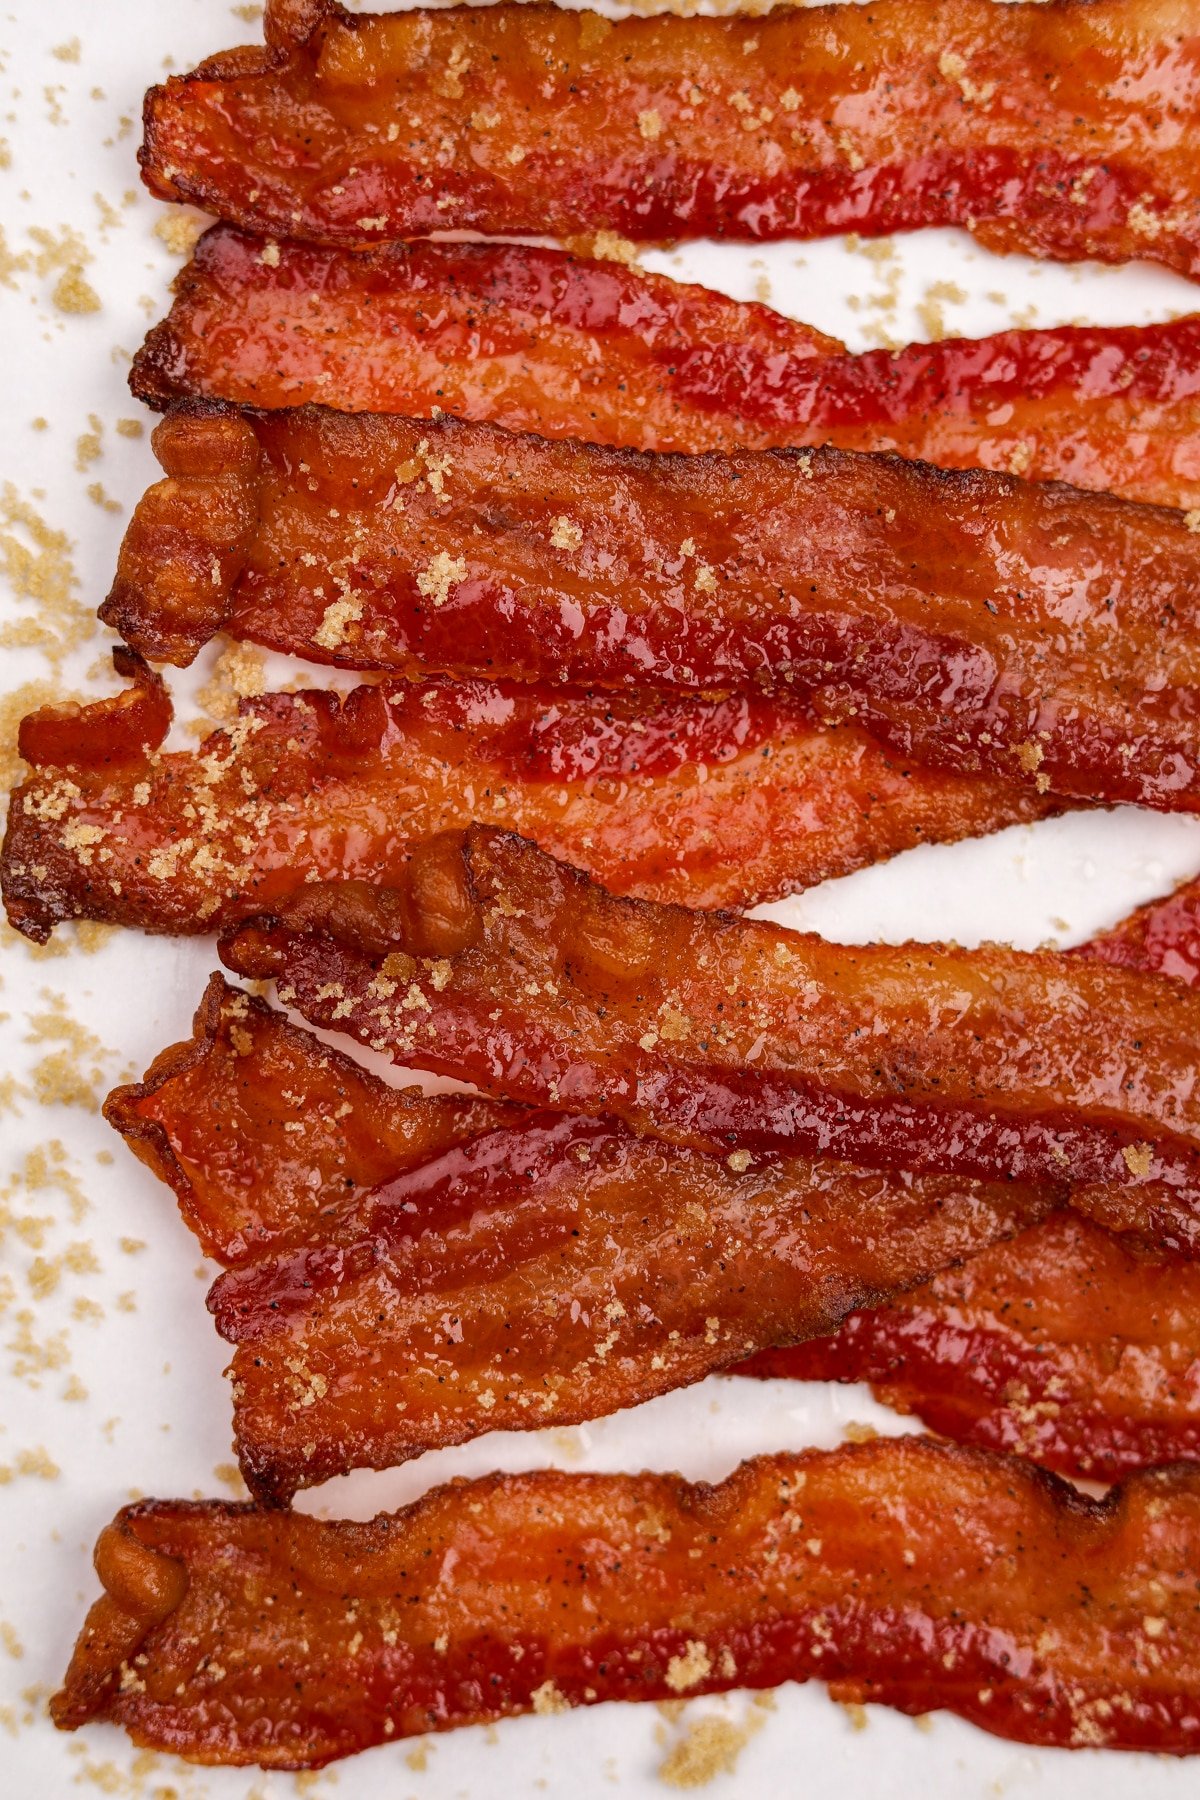 Multiple slices of candied bacon overlapping each other.